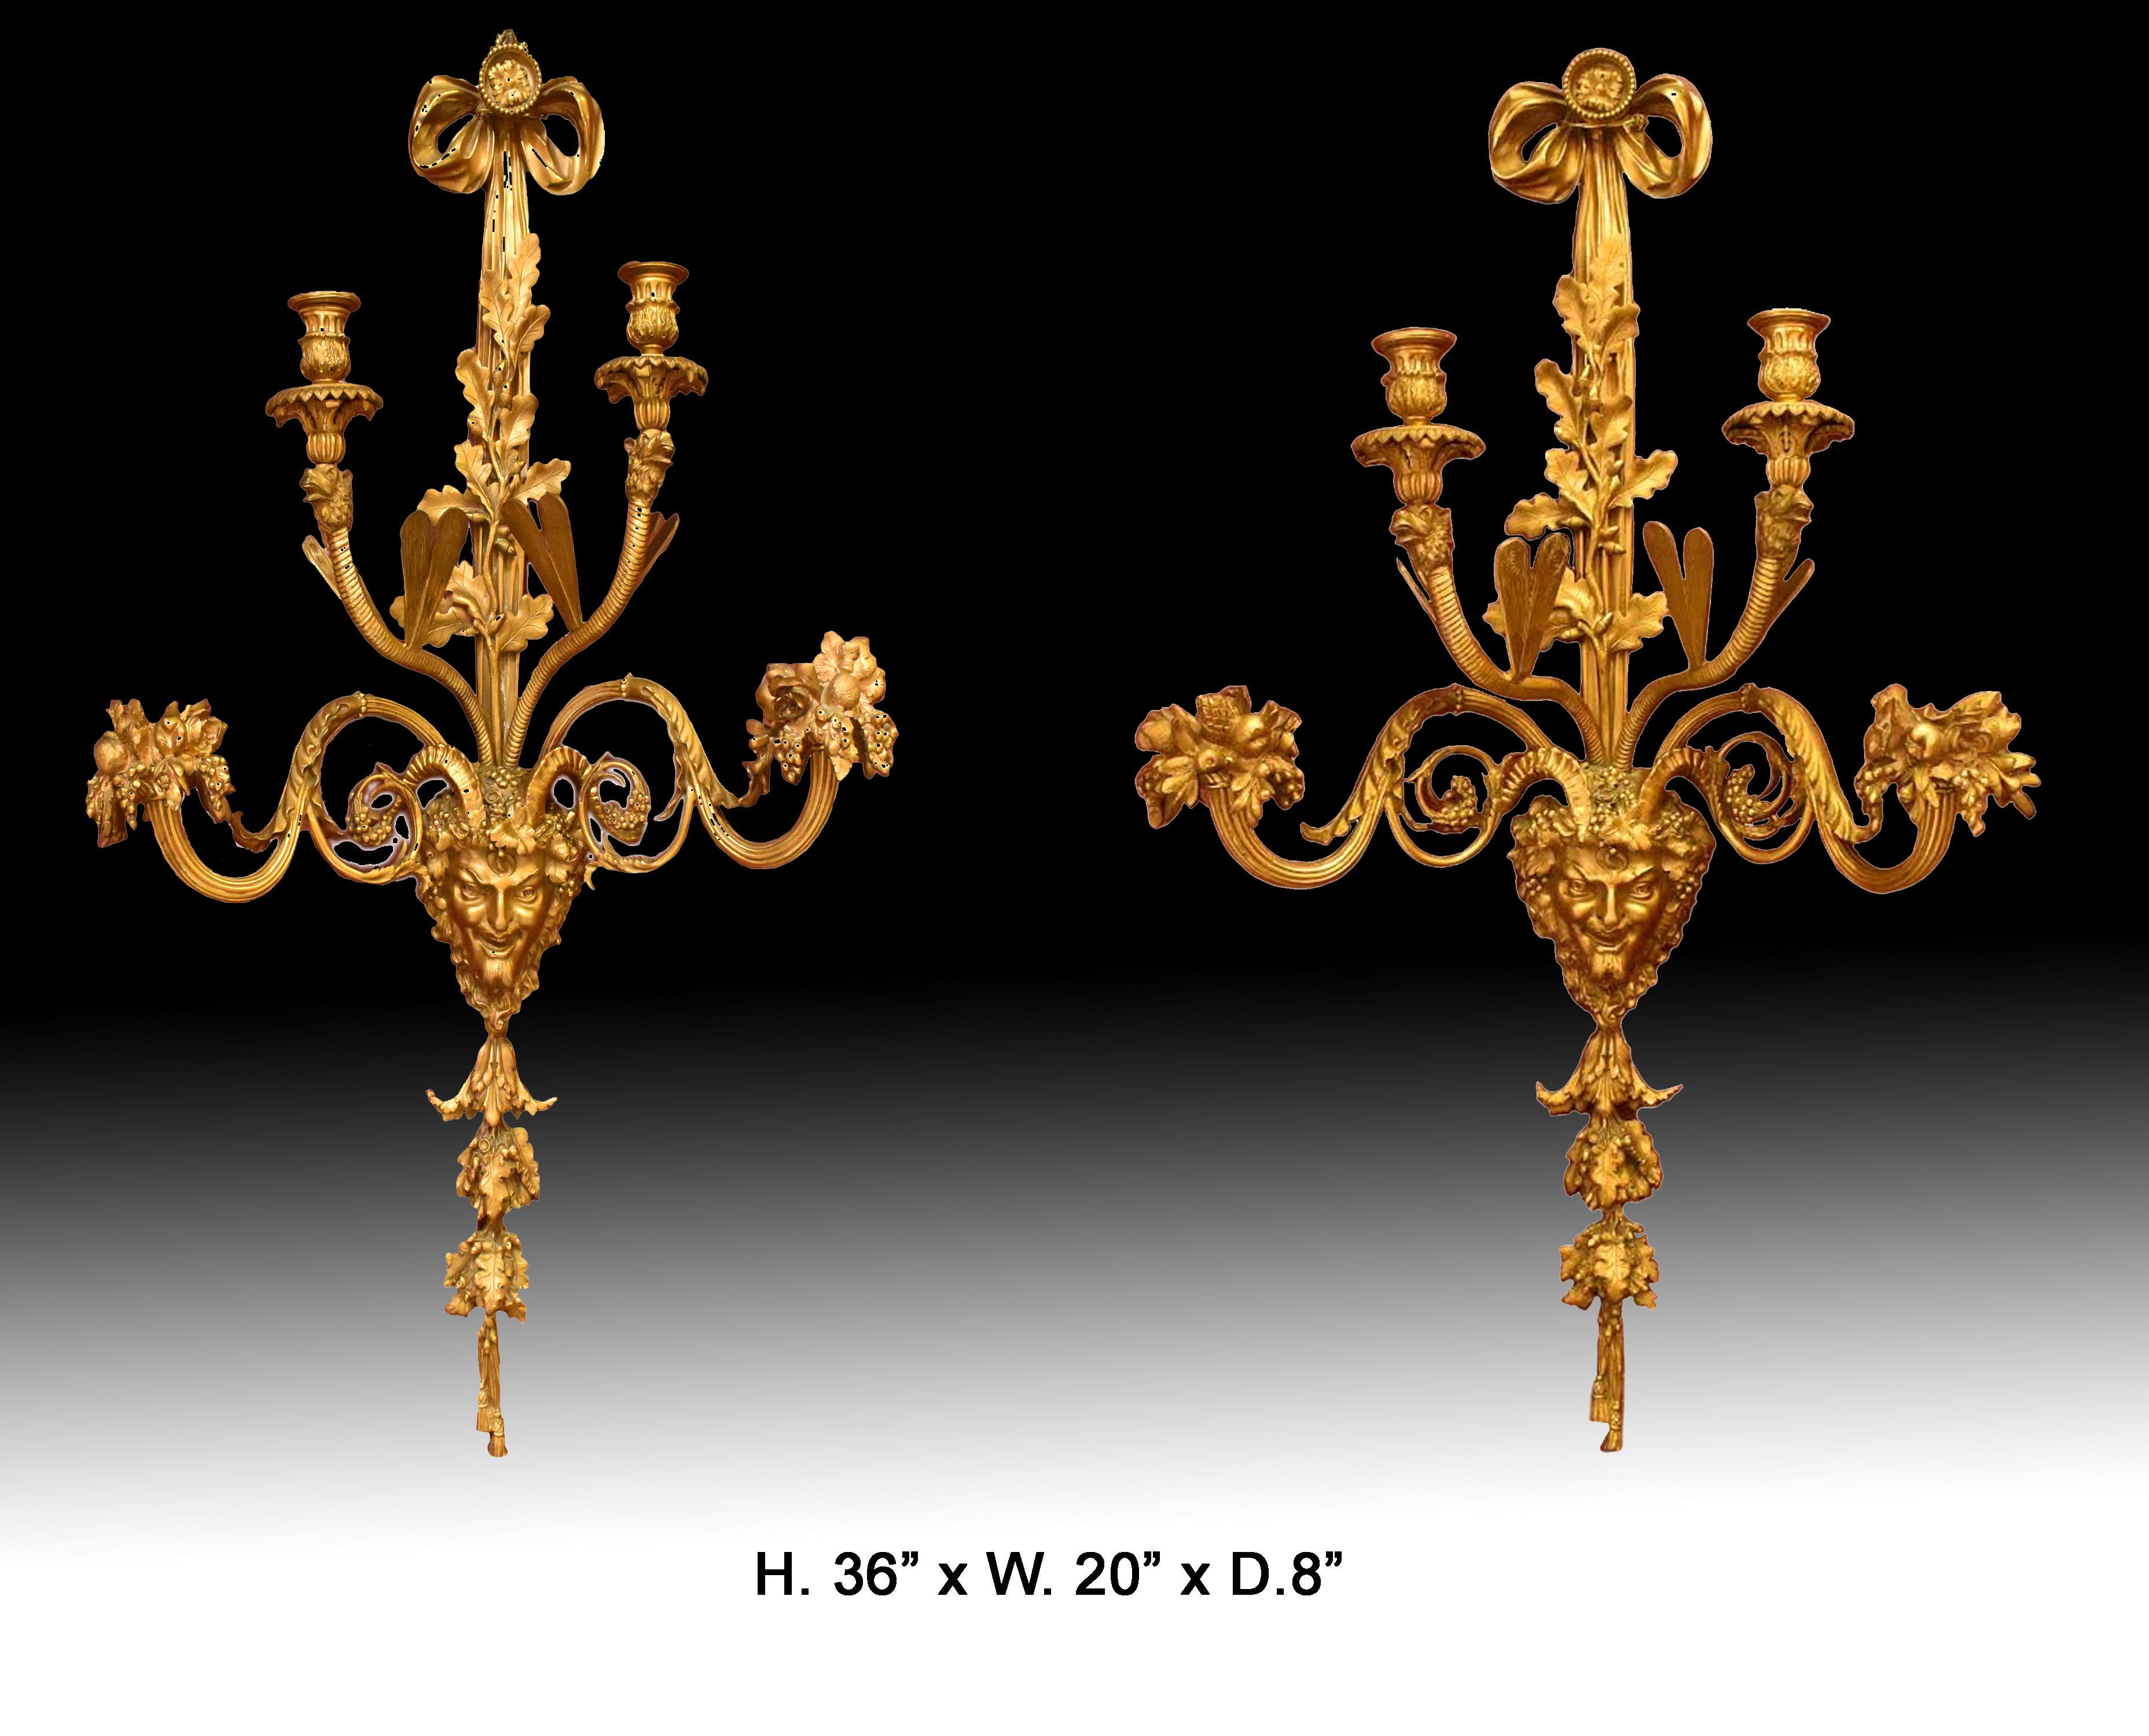 Exquisite pair of 19 century French louis XV style ormolu 4 light sconces.
Each surmounted with a ribbon, above intricate ormolu foliage and mythical mask, issuing two reeded candelabra arms with dragonfly wings and unique camel heads terminating